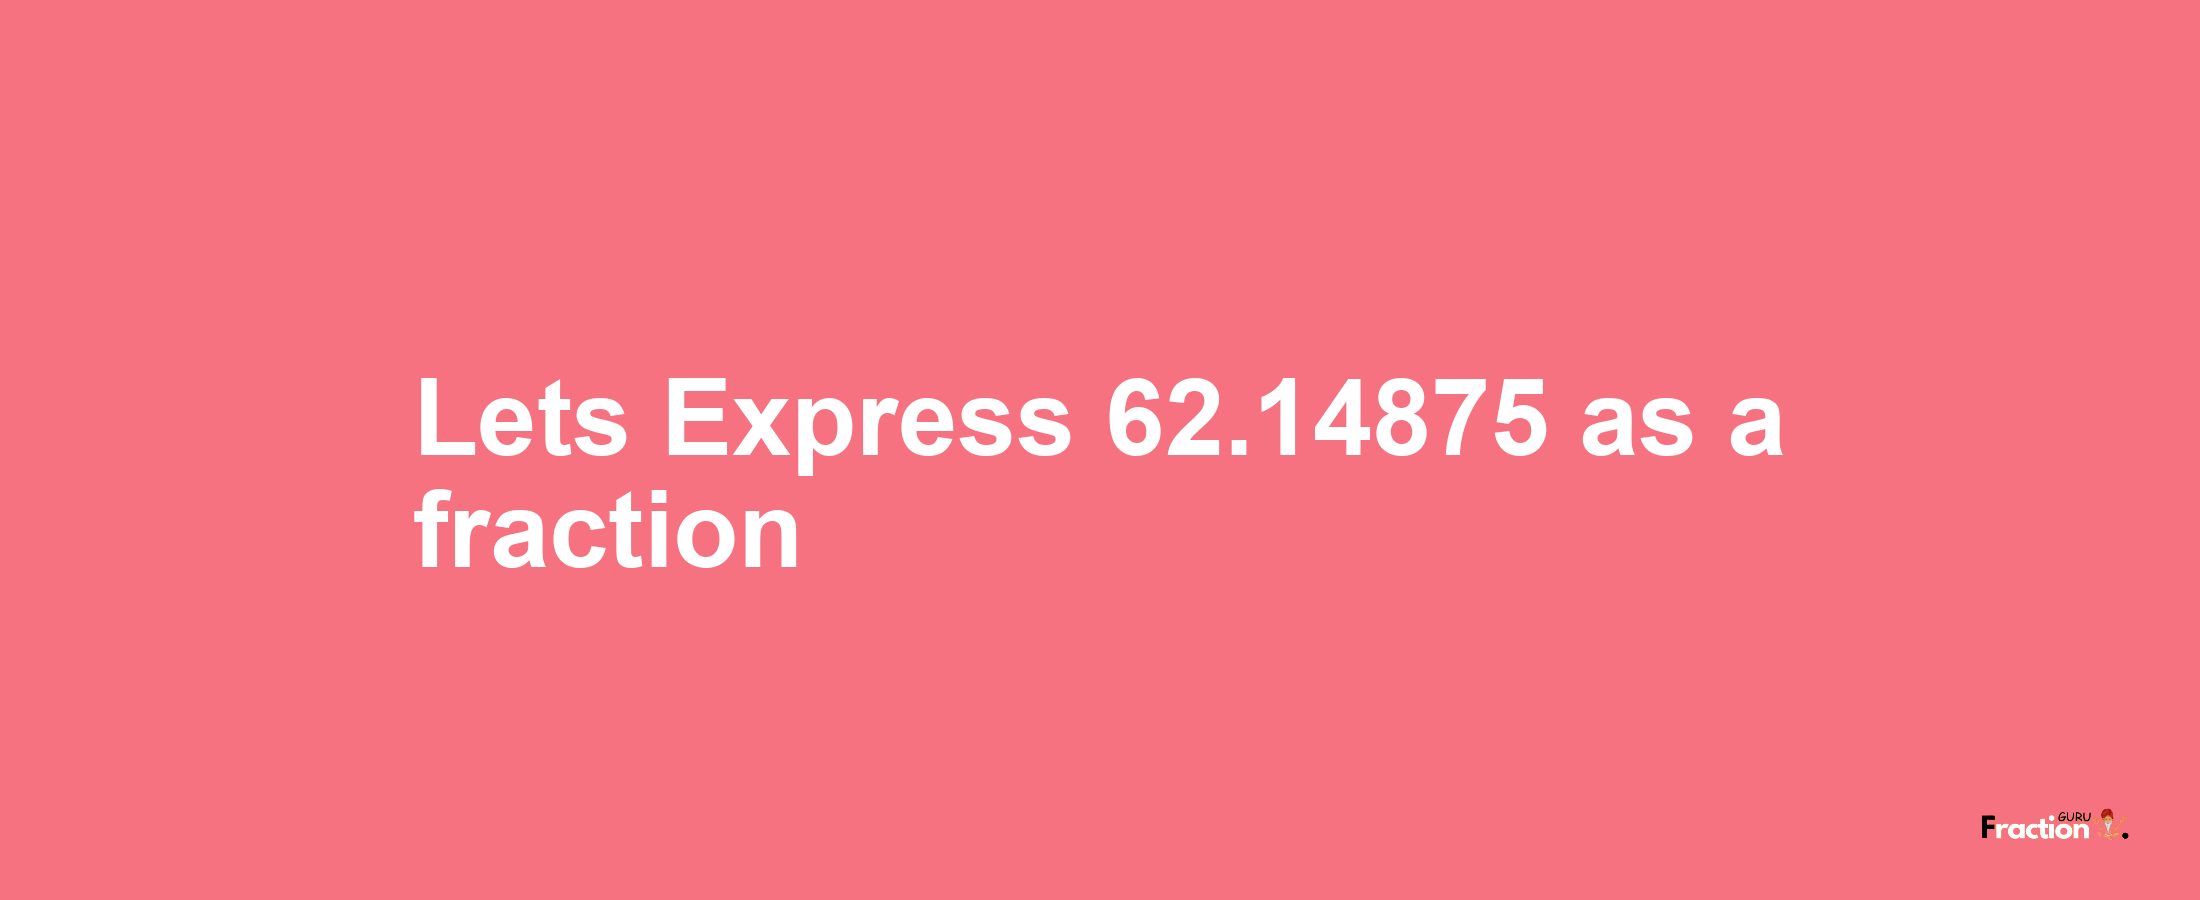 Lets Express 62.14875 as afraction